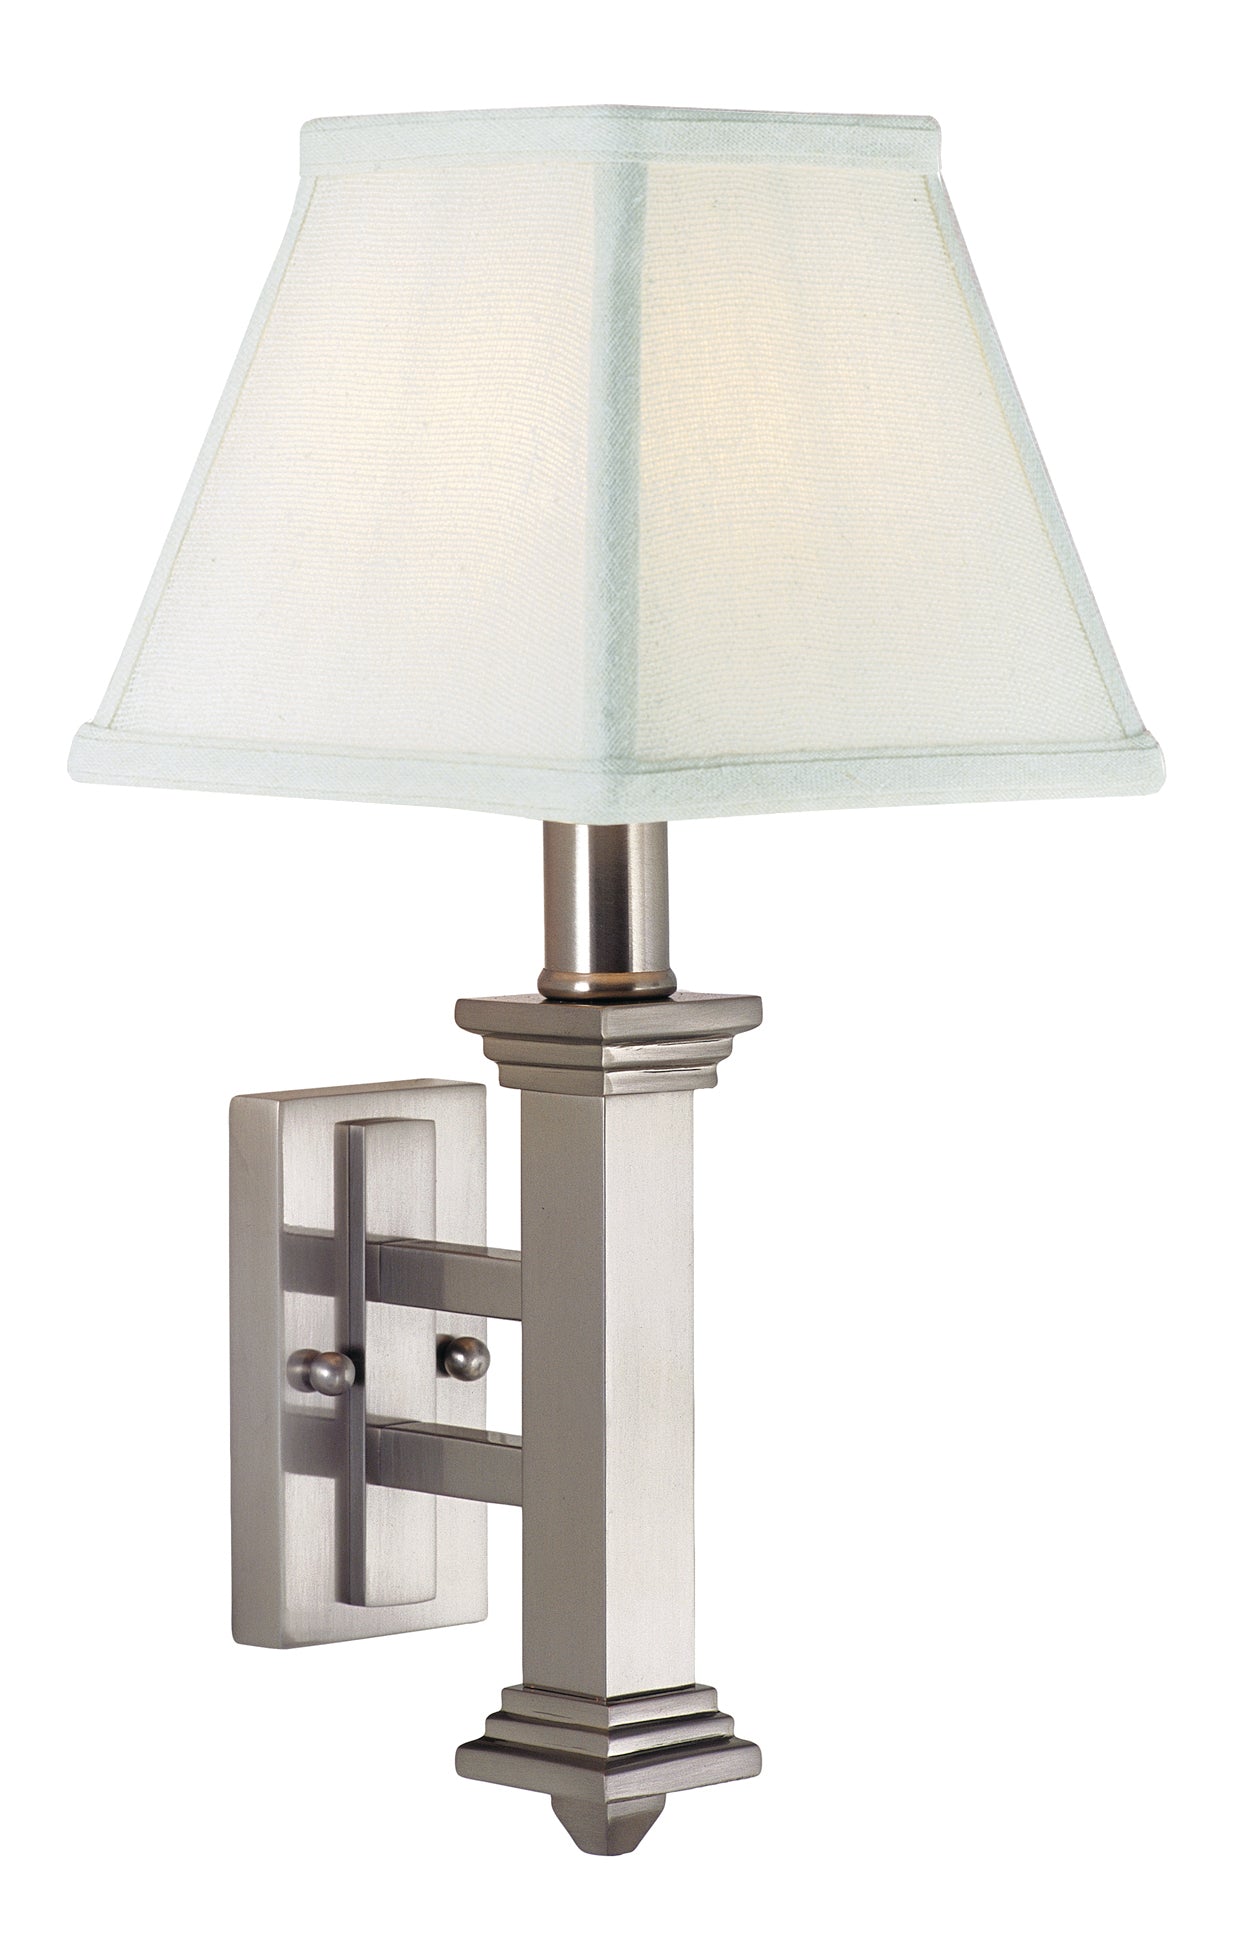 House of Troy Wall Sconce Satin Nickel WL609-SN